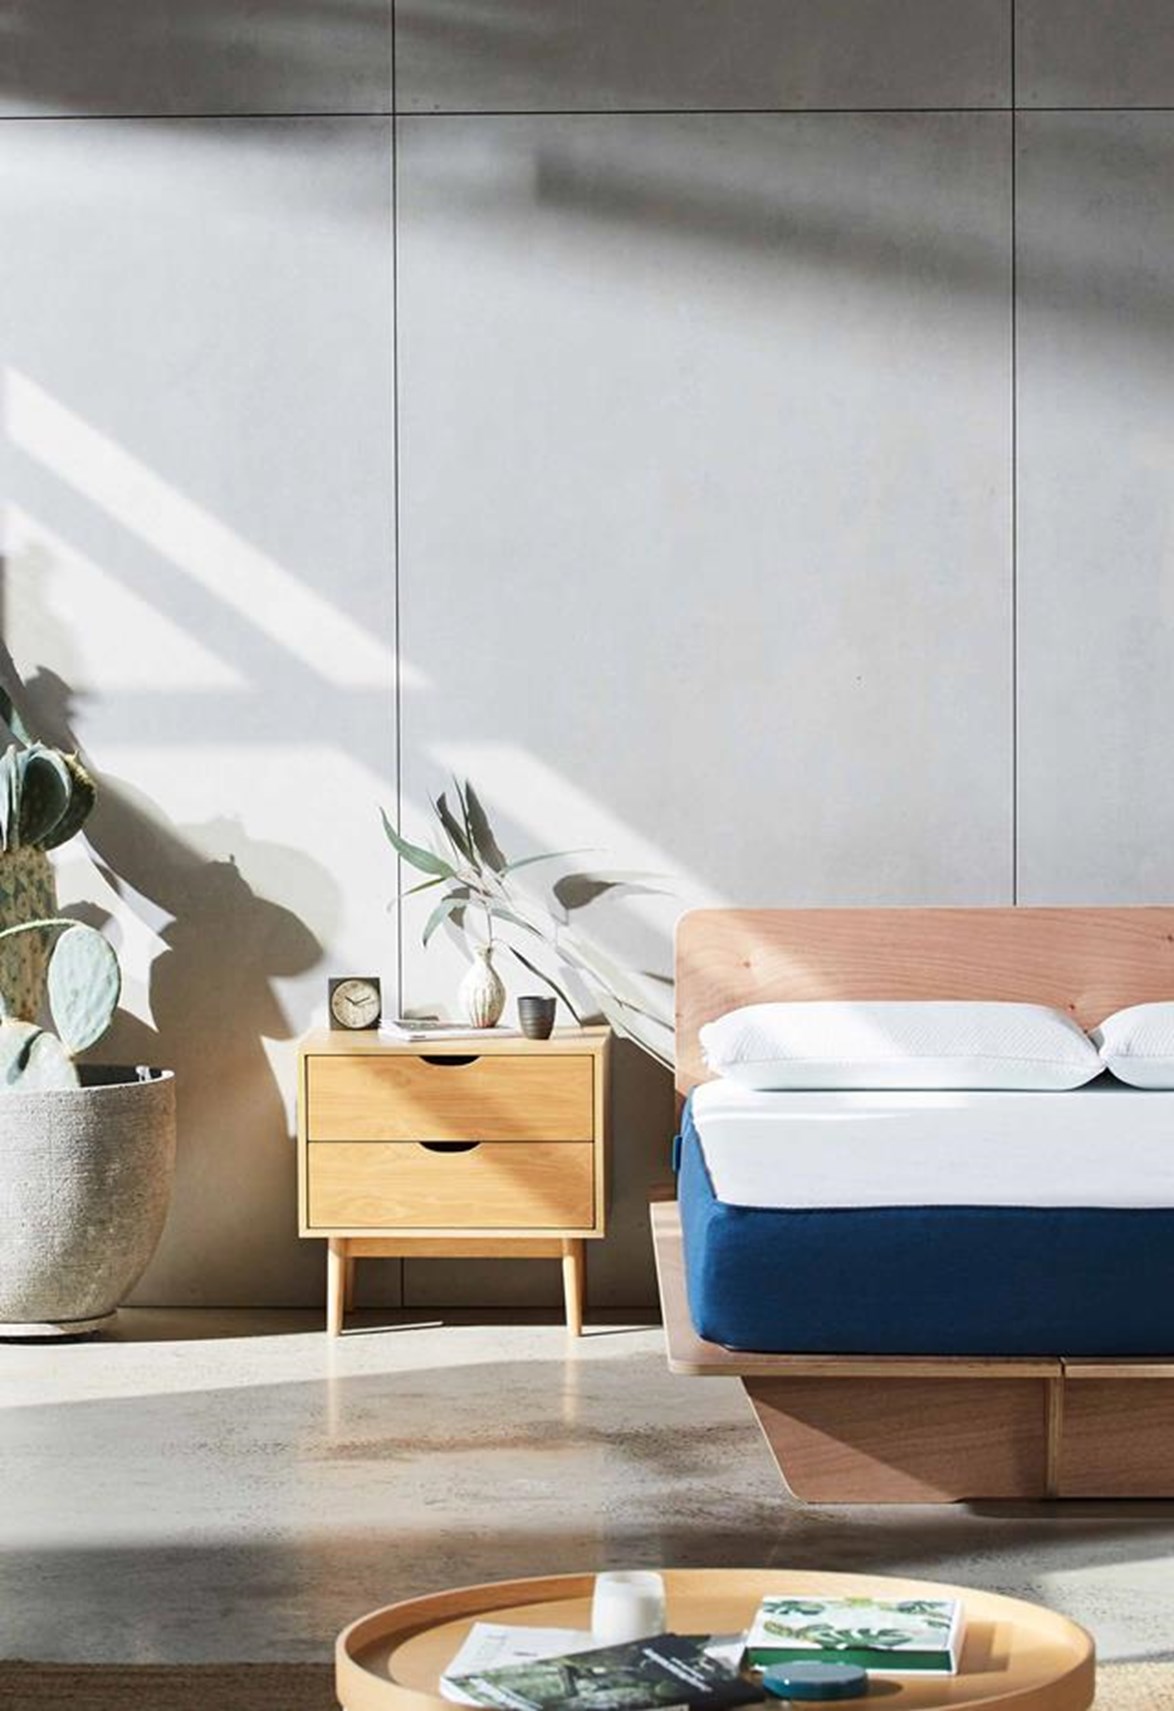 **[KOALA](https://prf.hn/click/camref:1100lqycd/pubref:htl/destination:https://koala.com/en-au|target="_blank")** 
<br><br>
This Australian brand makes furniture for the digital age. Their products are affordable but of a high quality and extremely comfortable (we're yet to find something of theirs that we don't love). A 4-hour delivery service is also a major plus as well as their partnership with the WWF and other Koala charities which sees them provide a donation with every mattress sold. 
<br><br>
**[SHOP NOW](https://prf.hn/click/camref:1100lqycd/pubref:htl/destination:https://koala.com/en-au|target="_blank")**